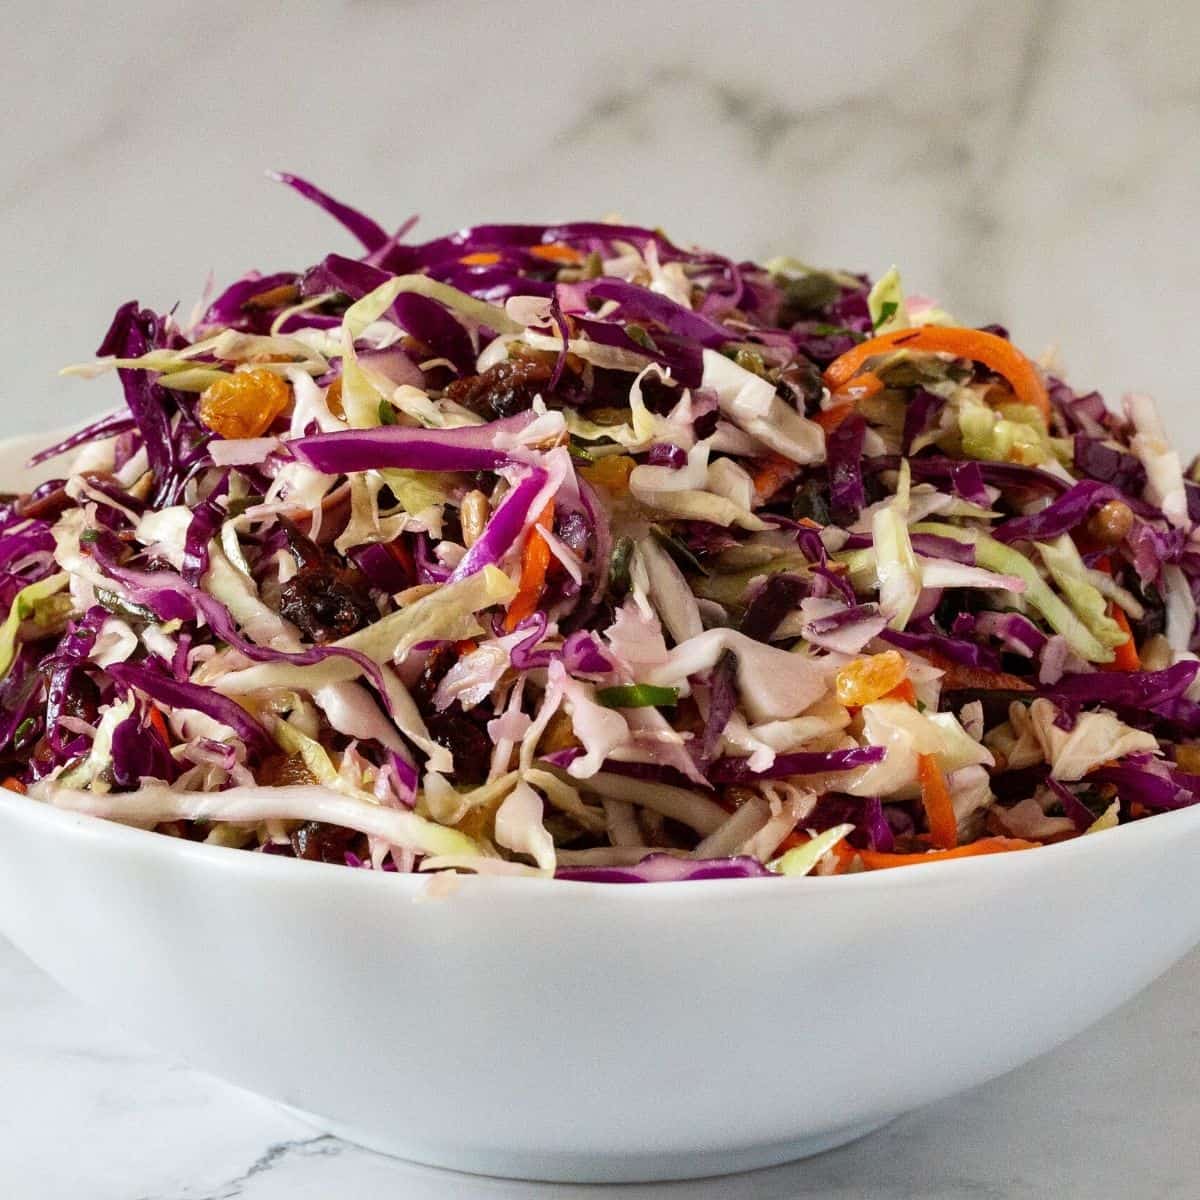 A bowl with cabbage salad recipe.